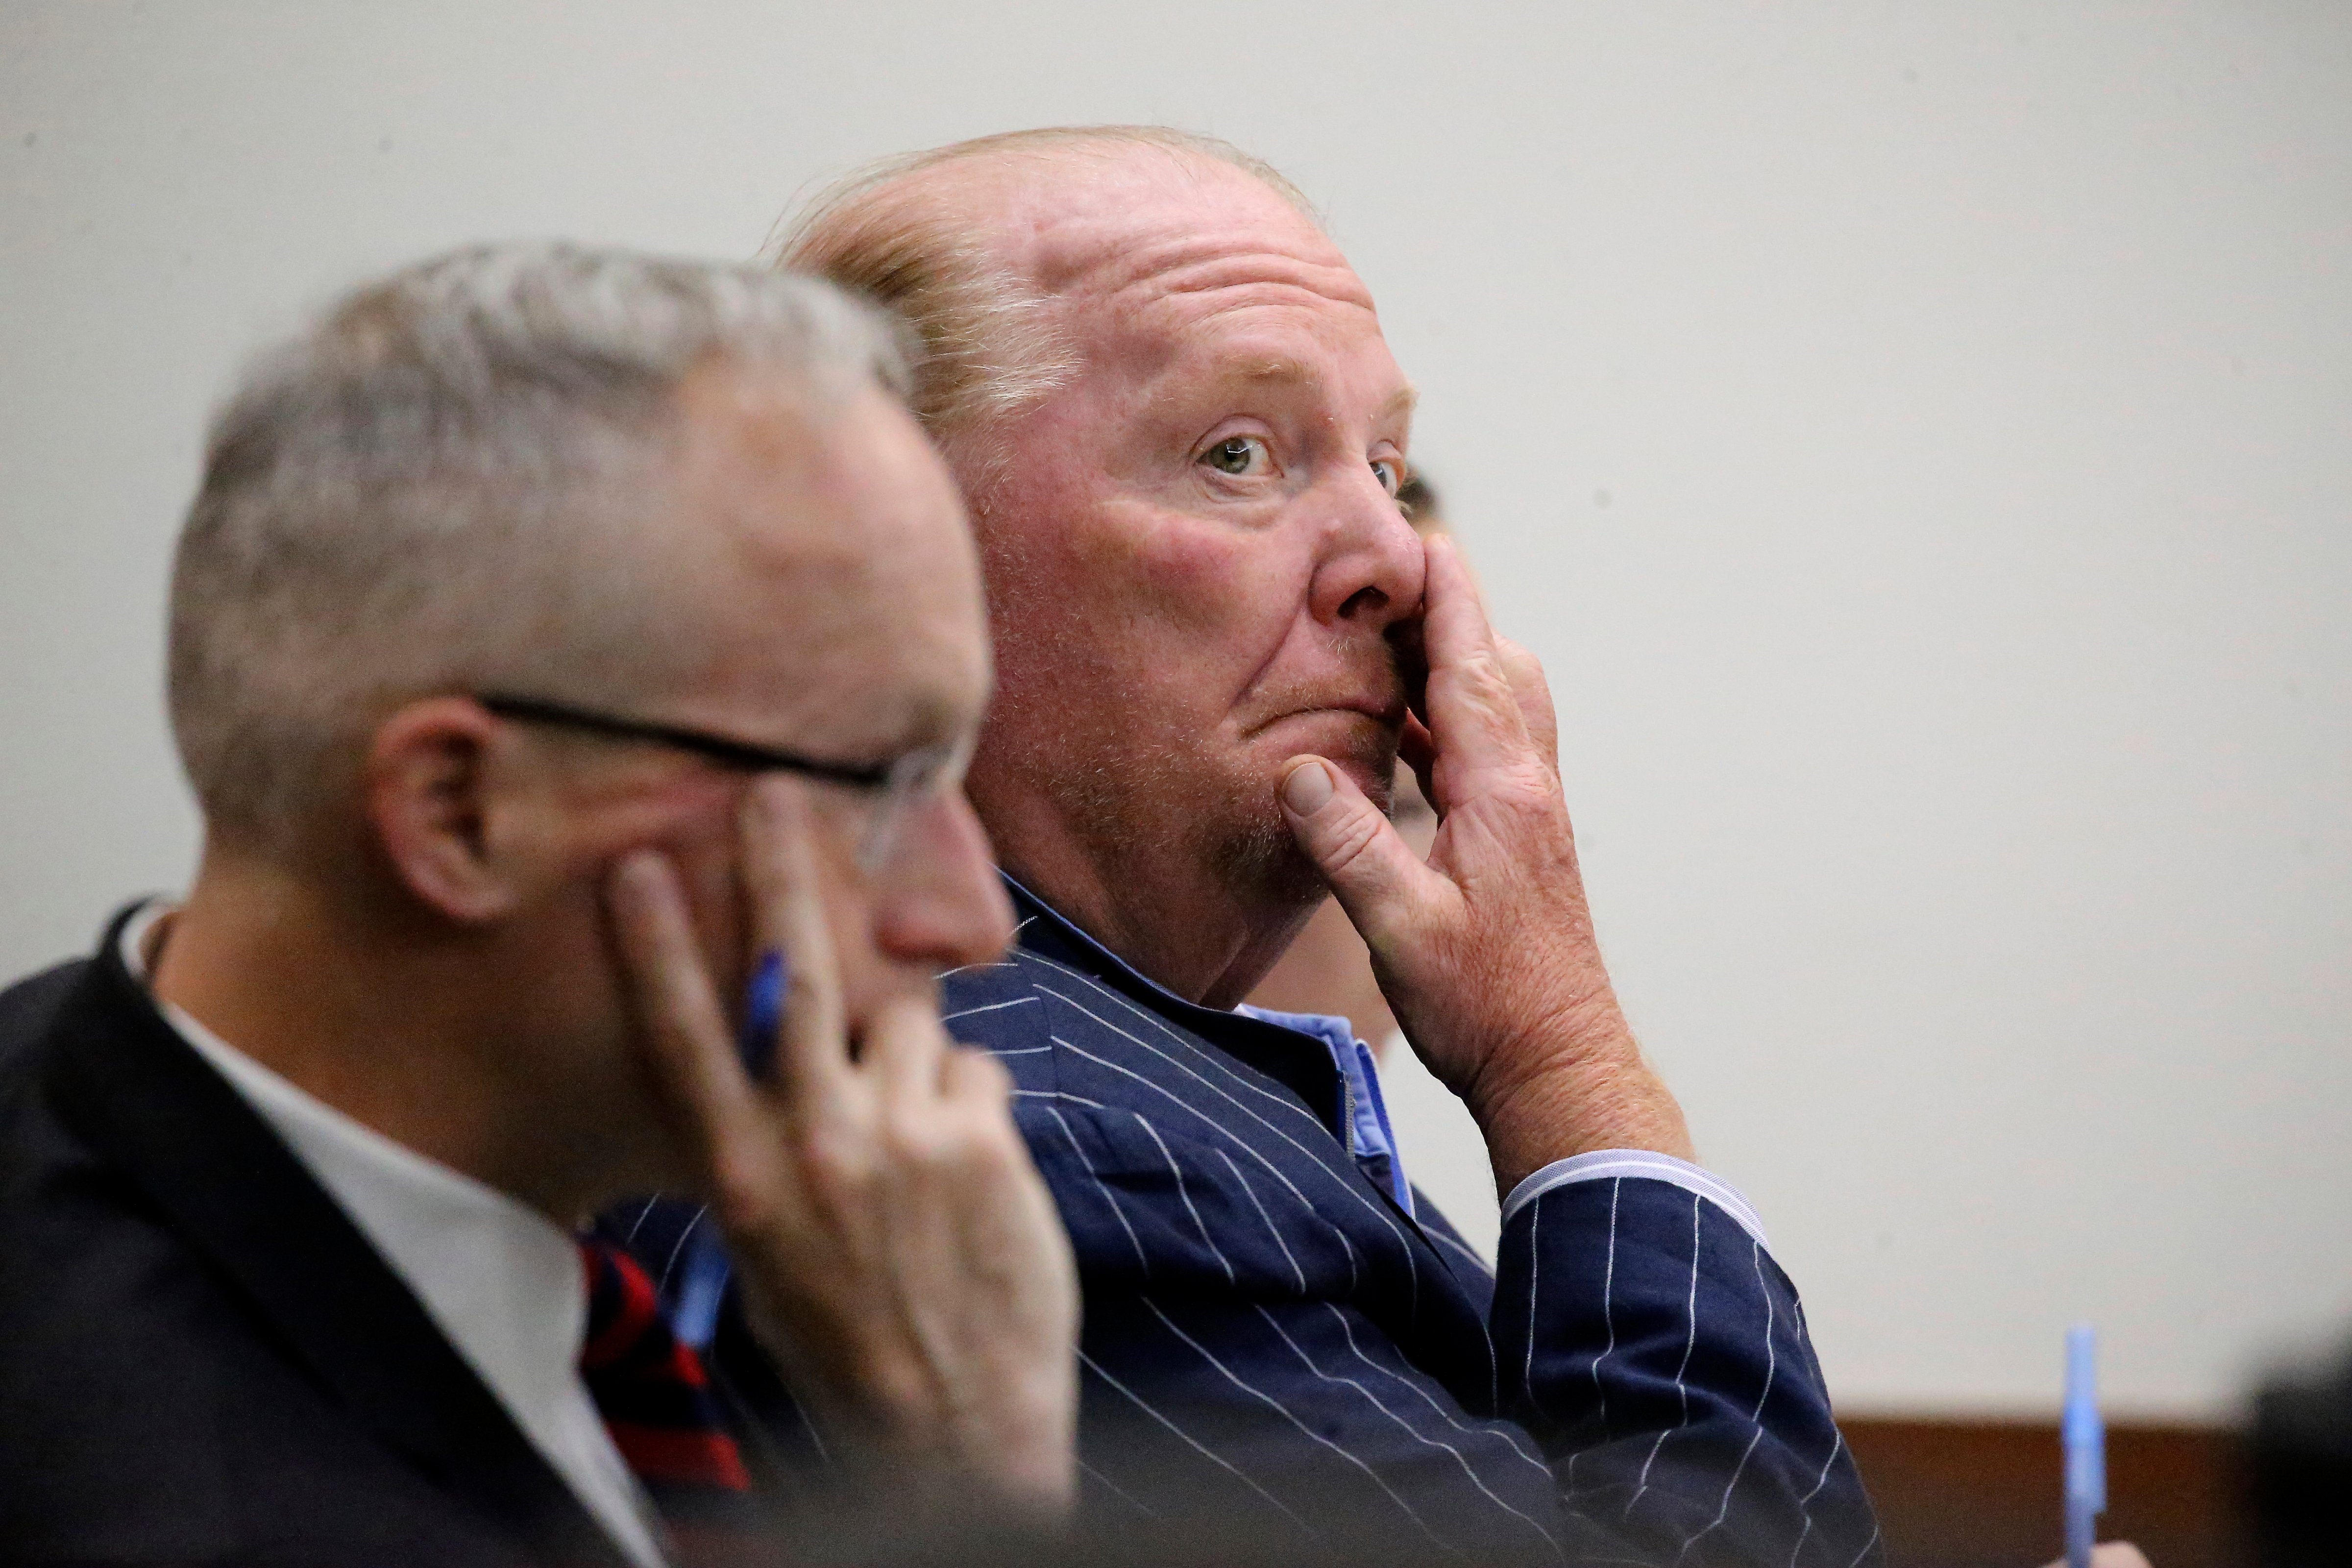 Celebrity Chef and Former Food Network Personality Mario Batali Acquitted of Sexual Misconduct